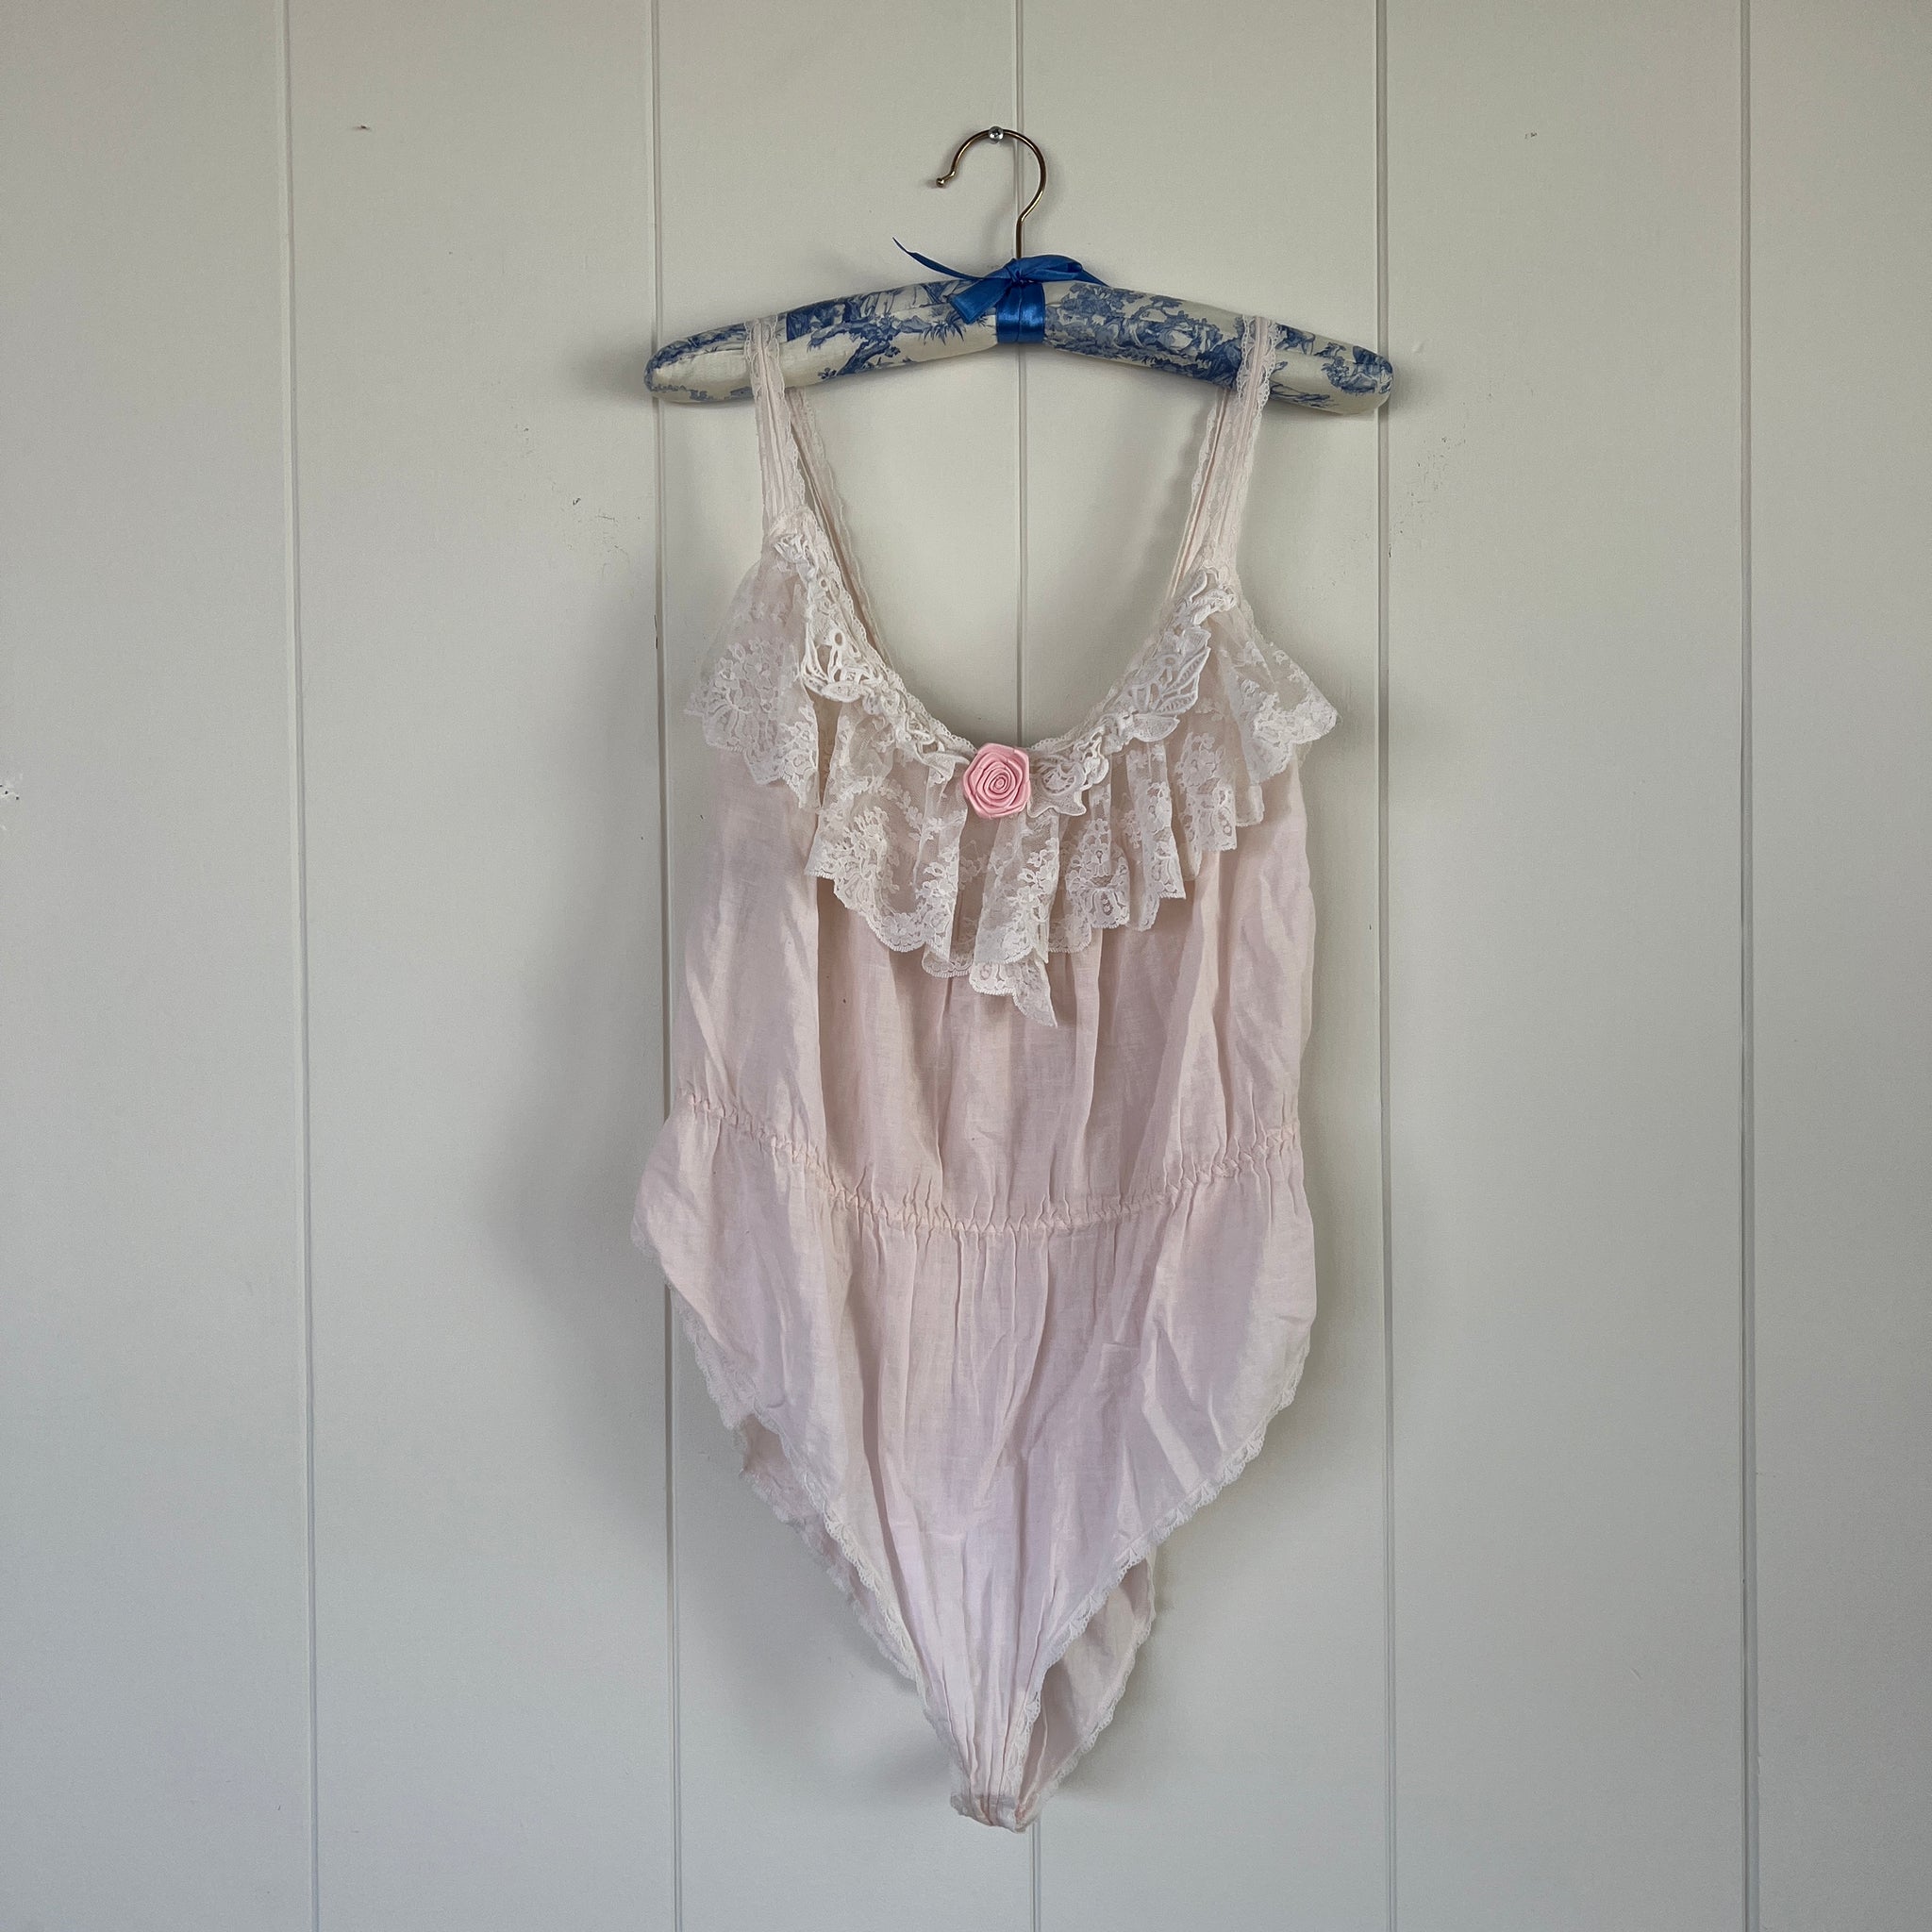 Vintage 'Lily Of France' lace bodysuit – Shop Rosemary Retro